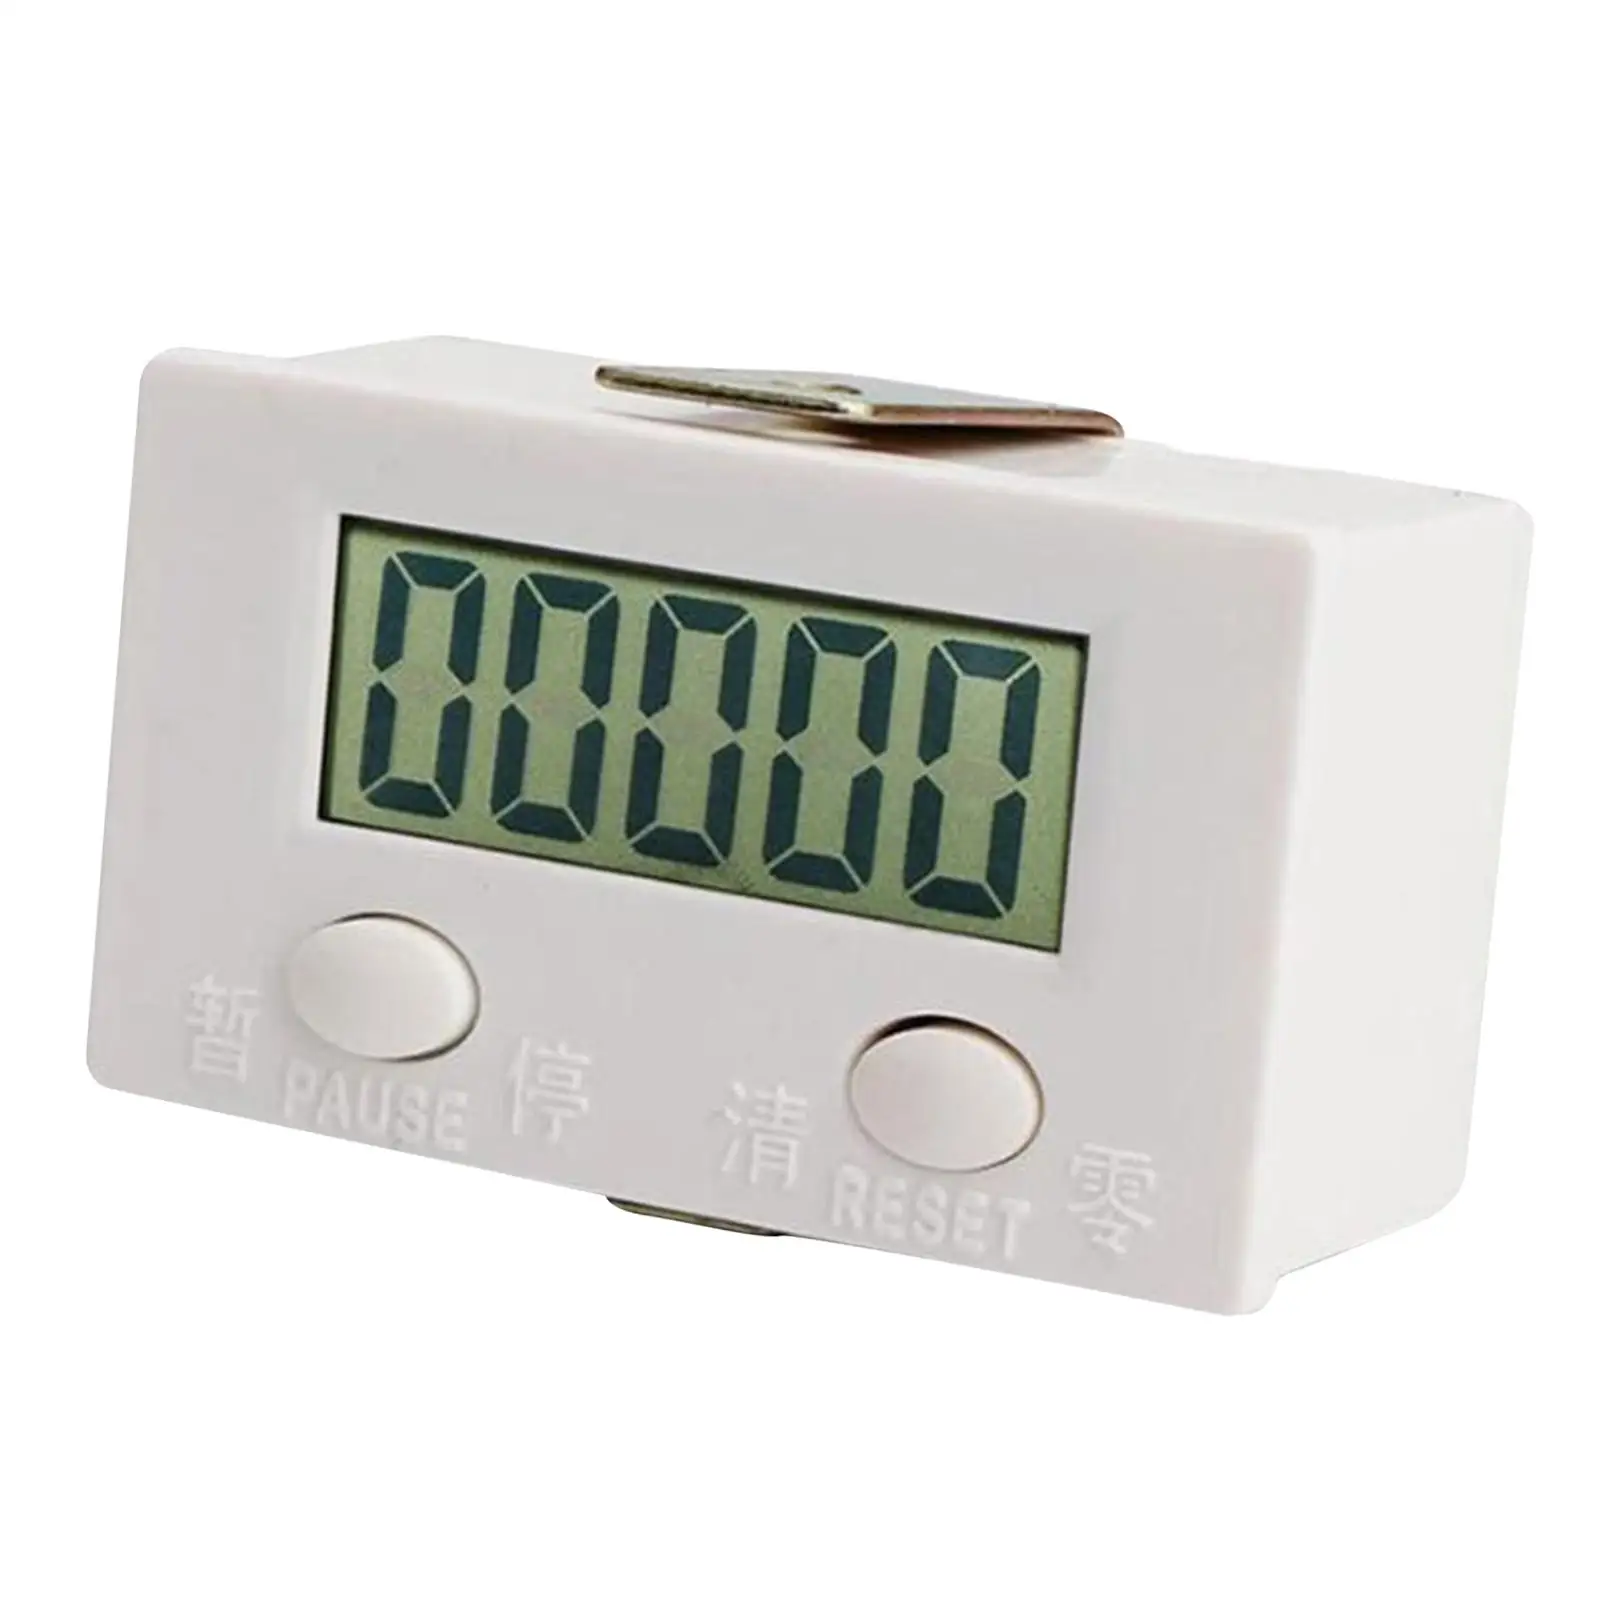 Electronic Digital Counter Tester Practical Switch Sensor Induction Display Counter